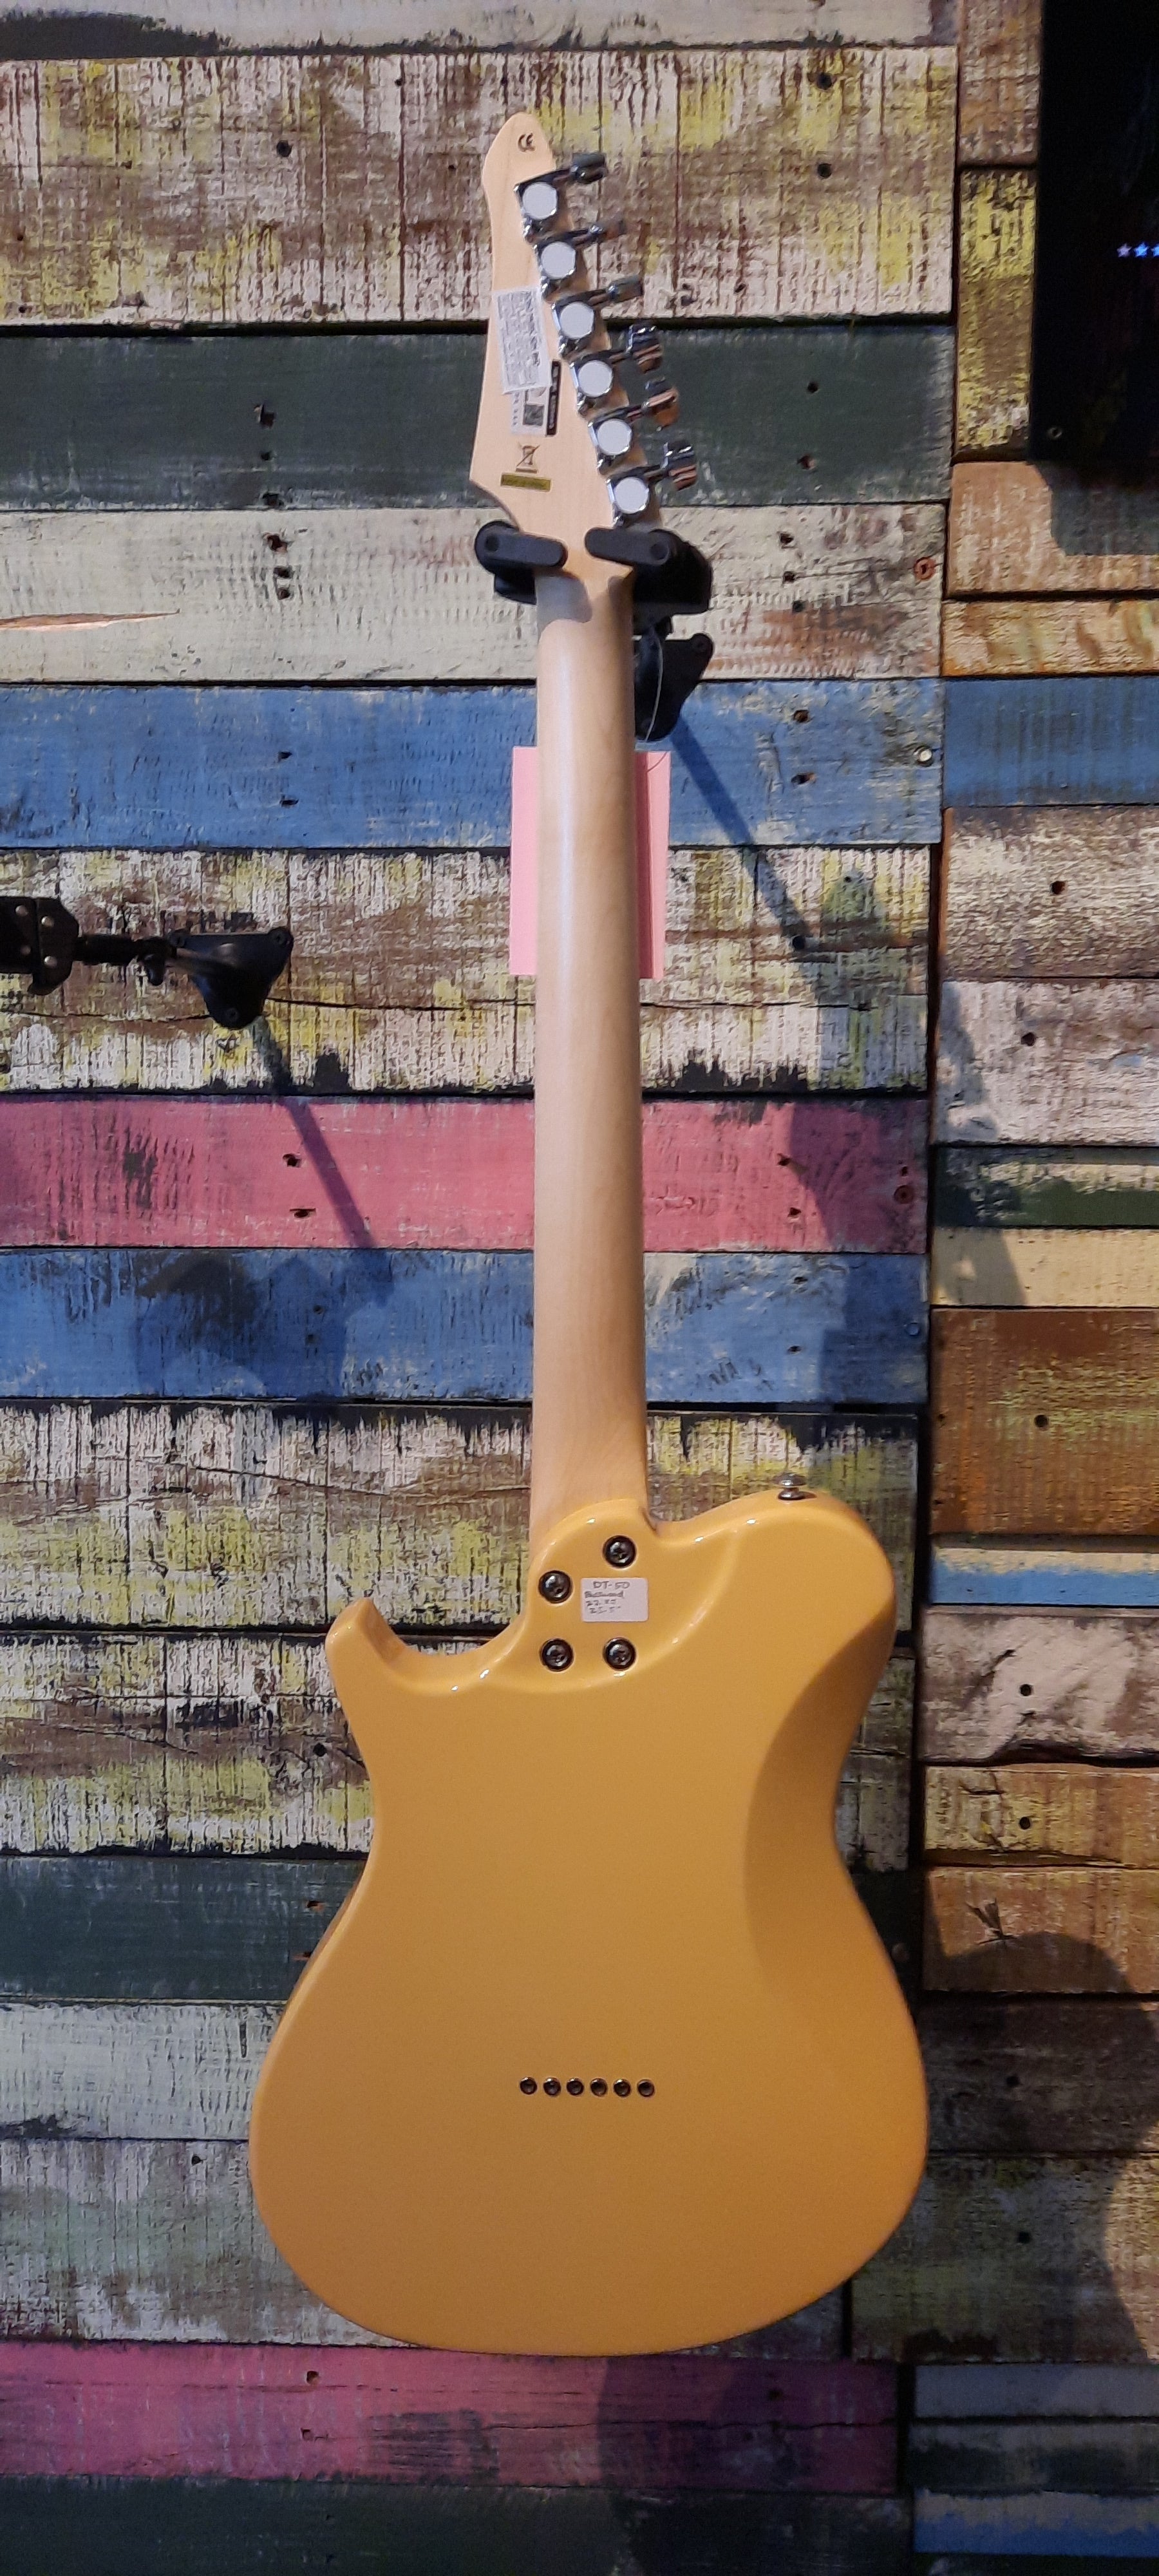 J&d Dt50 Electric Guitar Yellow (Yl)